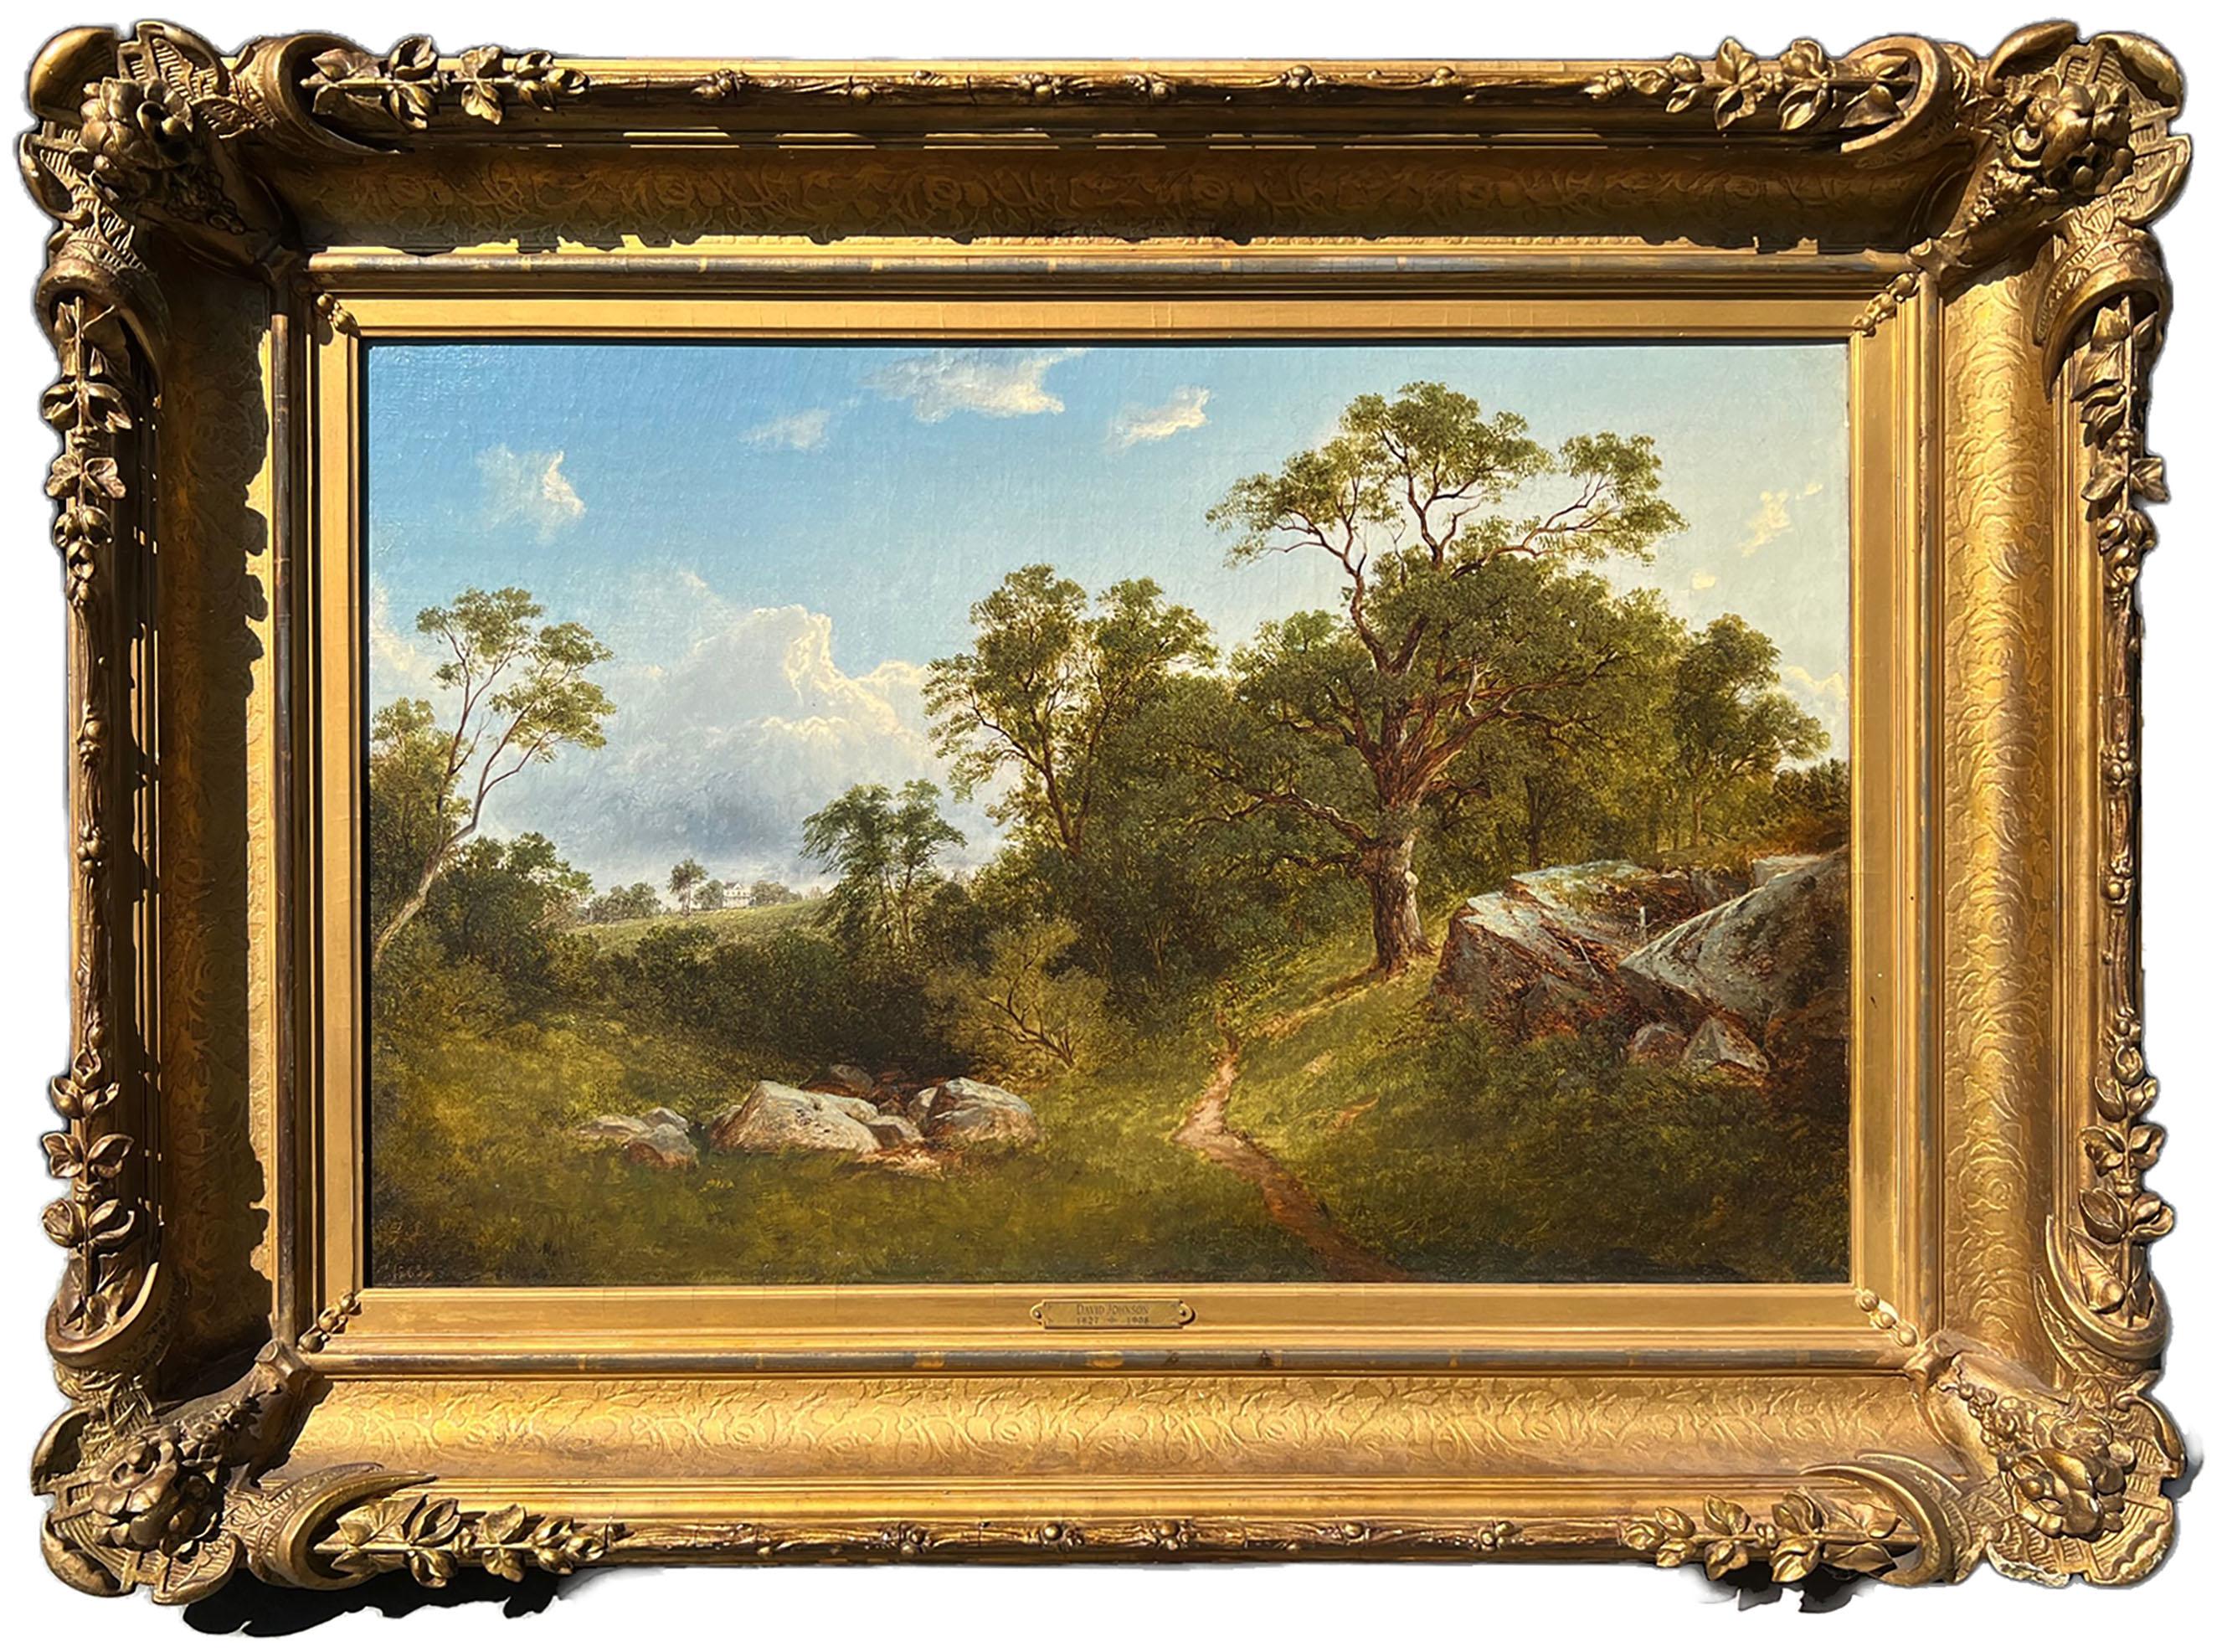 DAVID JOHNSON (1827-1908)
Landscape with Mansion, 1863
Oil on canvas
18 x 28 inches 
Signed and dated 1863, lower left

